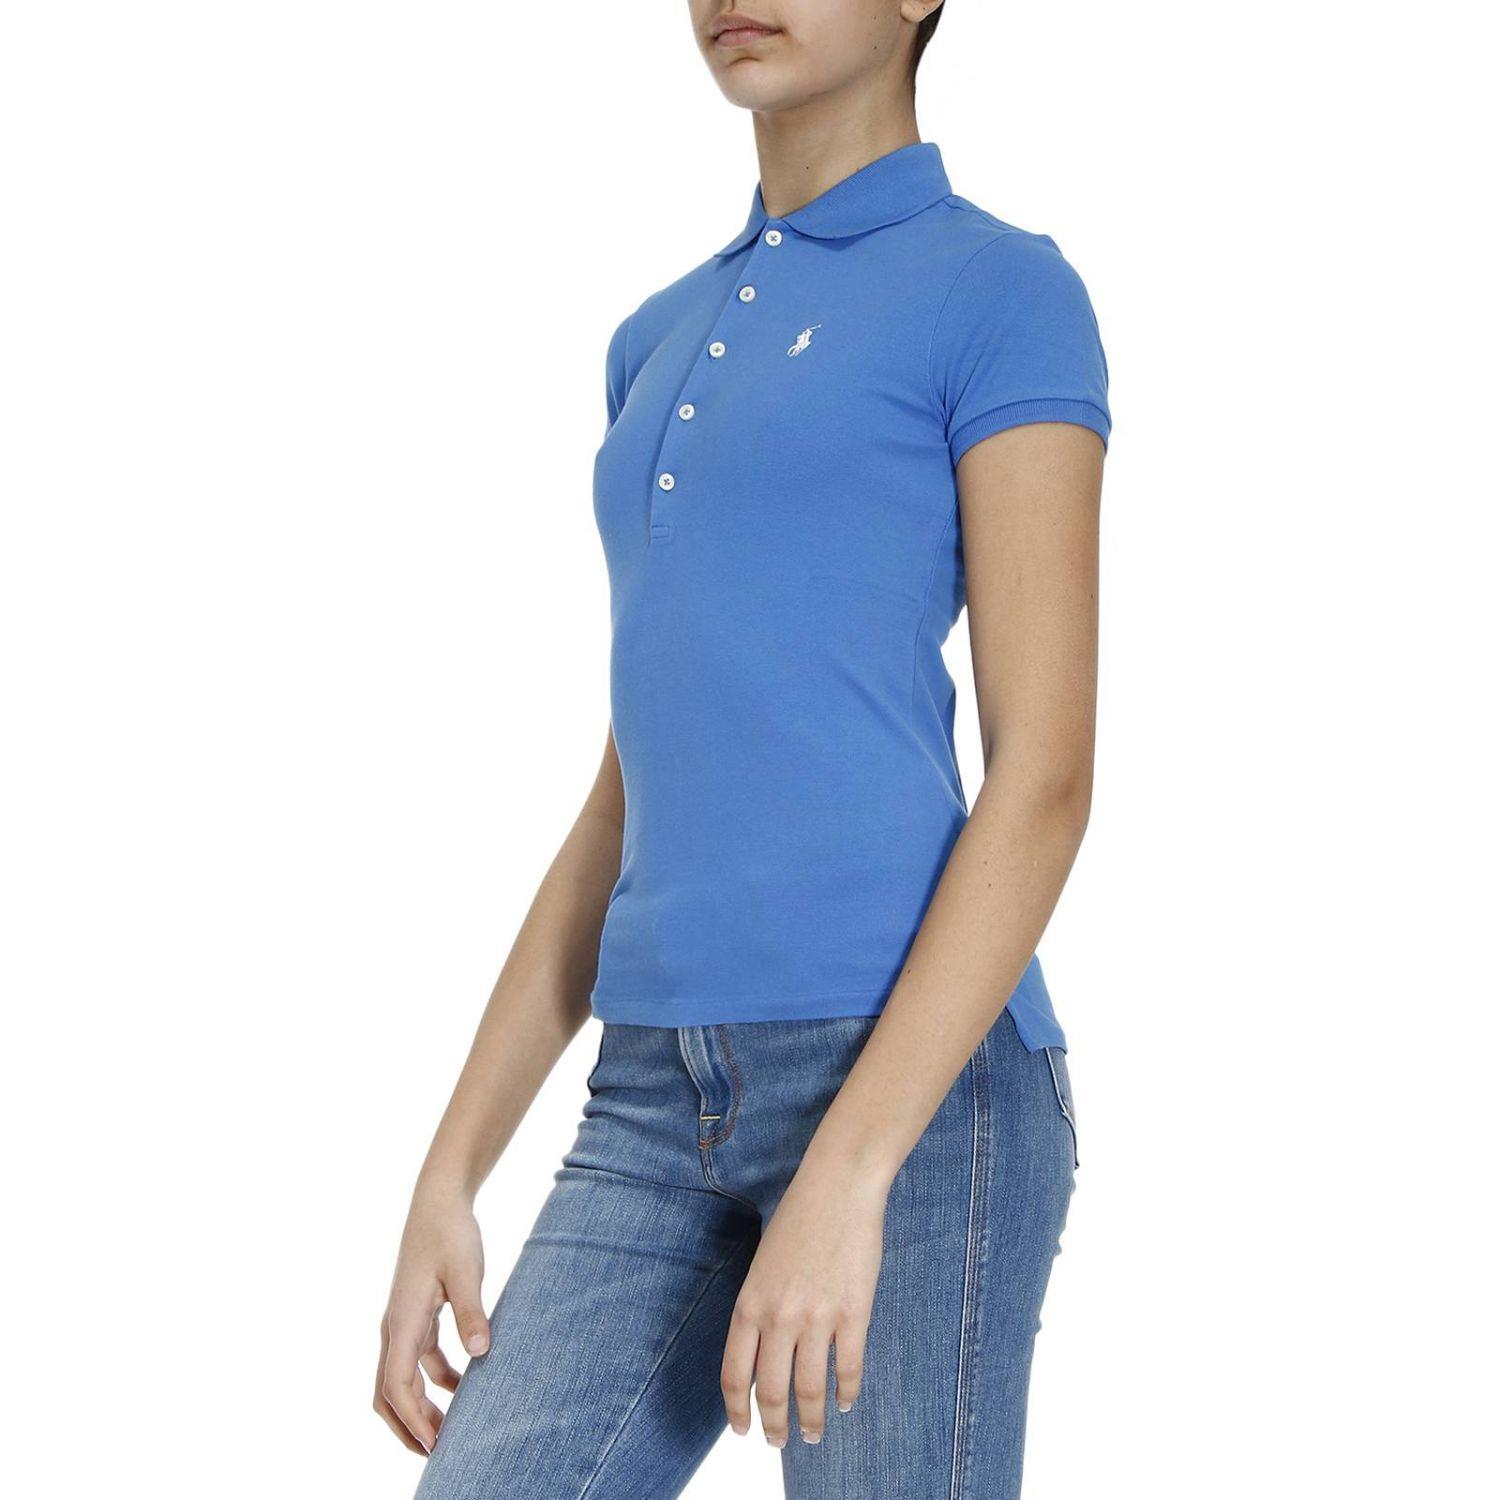 Protection girls ralph lauren t shirt city queen woollahra, Womens midi dress with sleeves, crop tops for plus size women. 